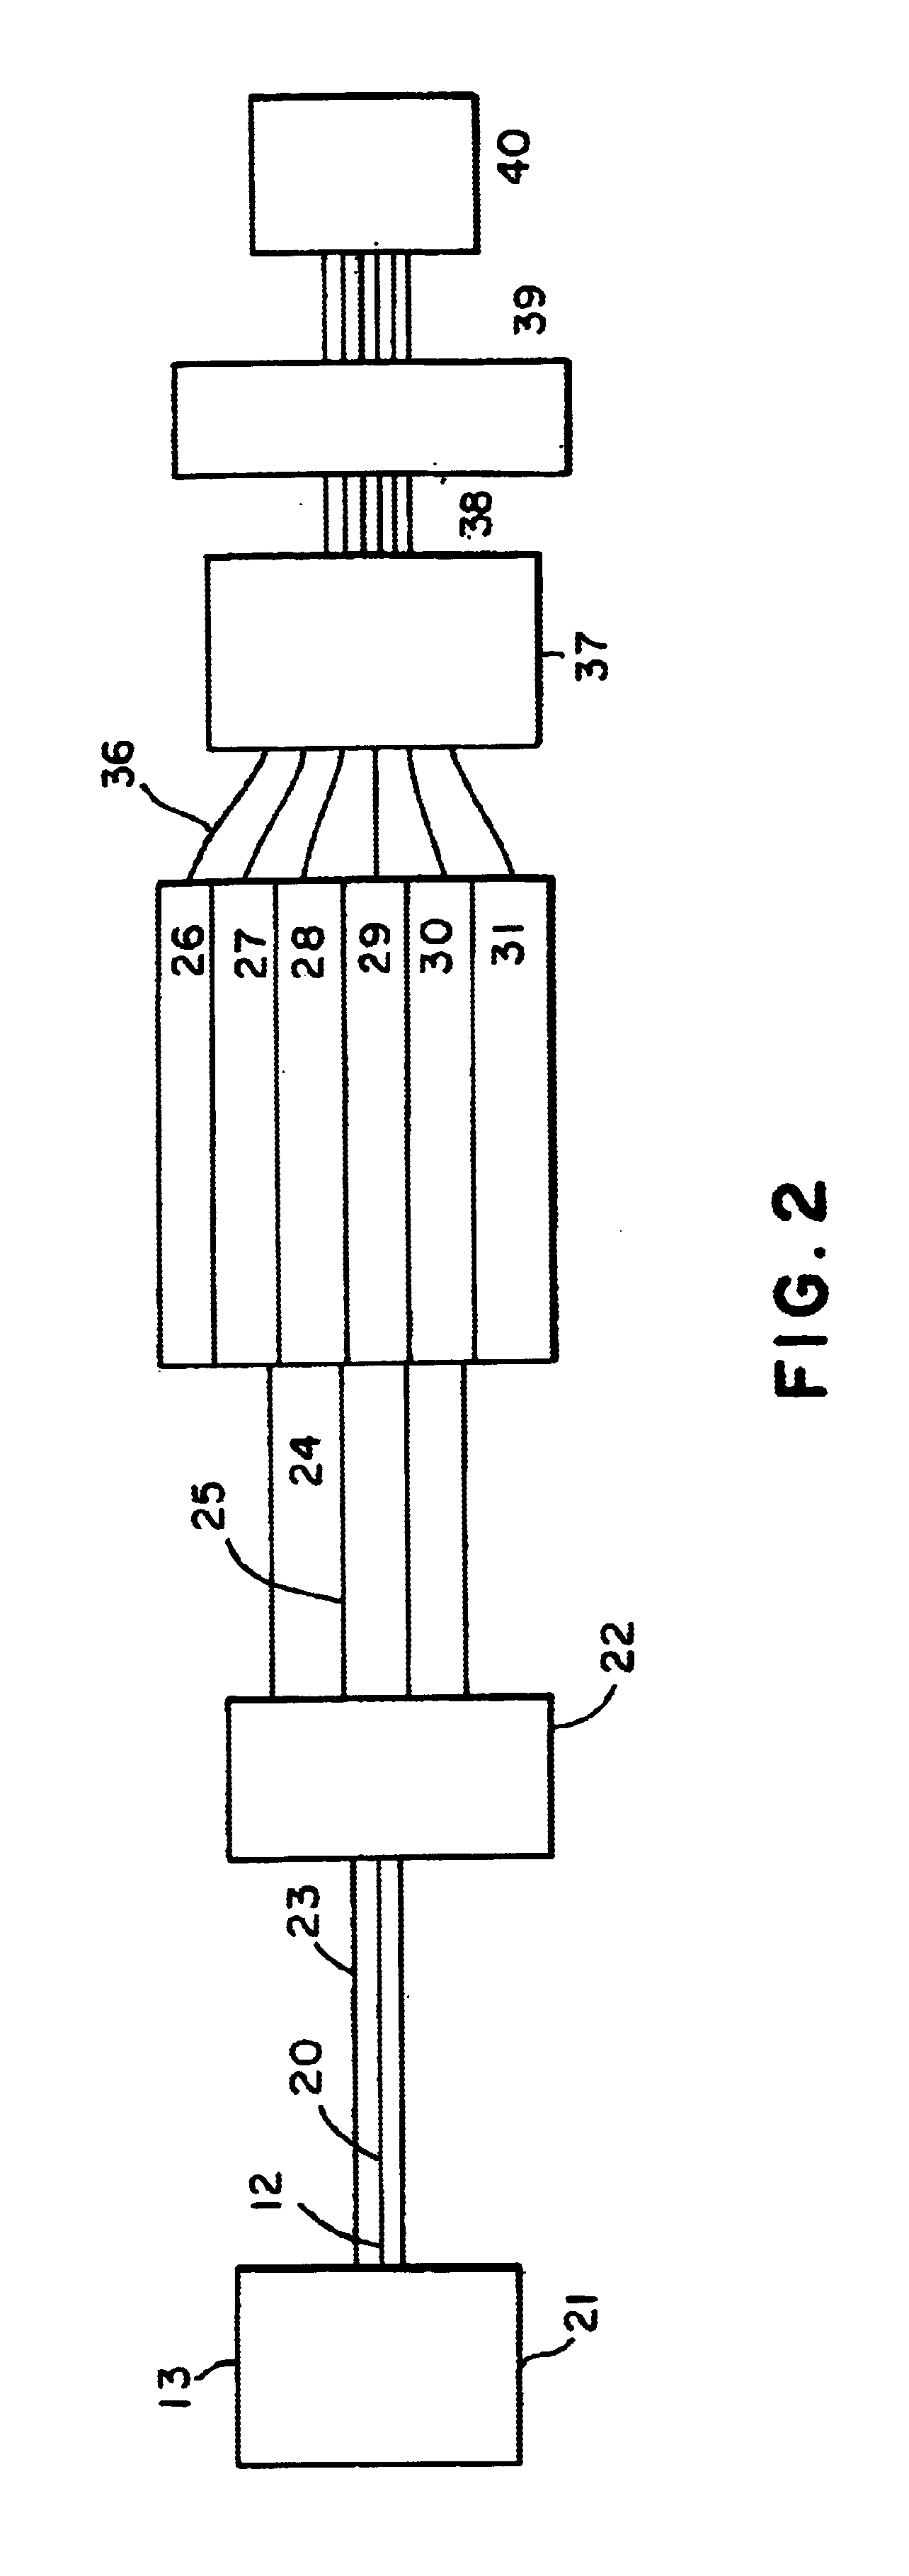 Method of forming a wire package